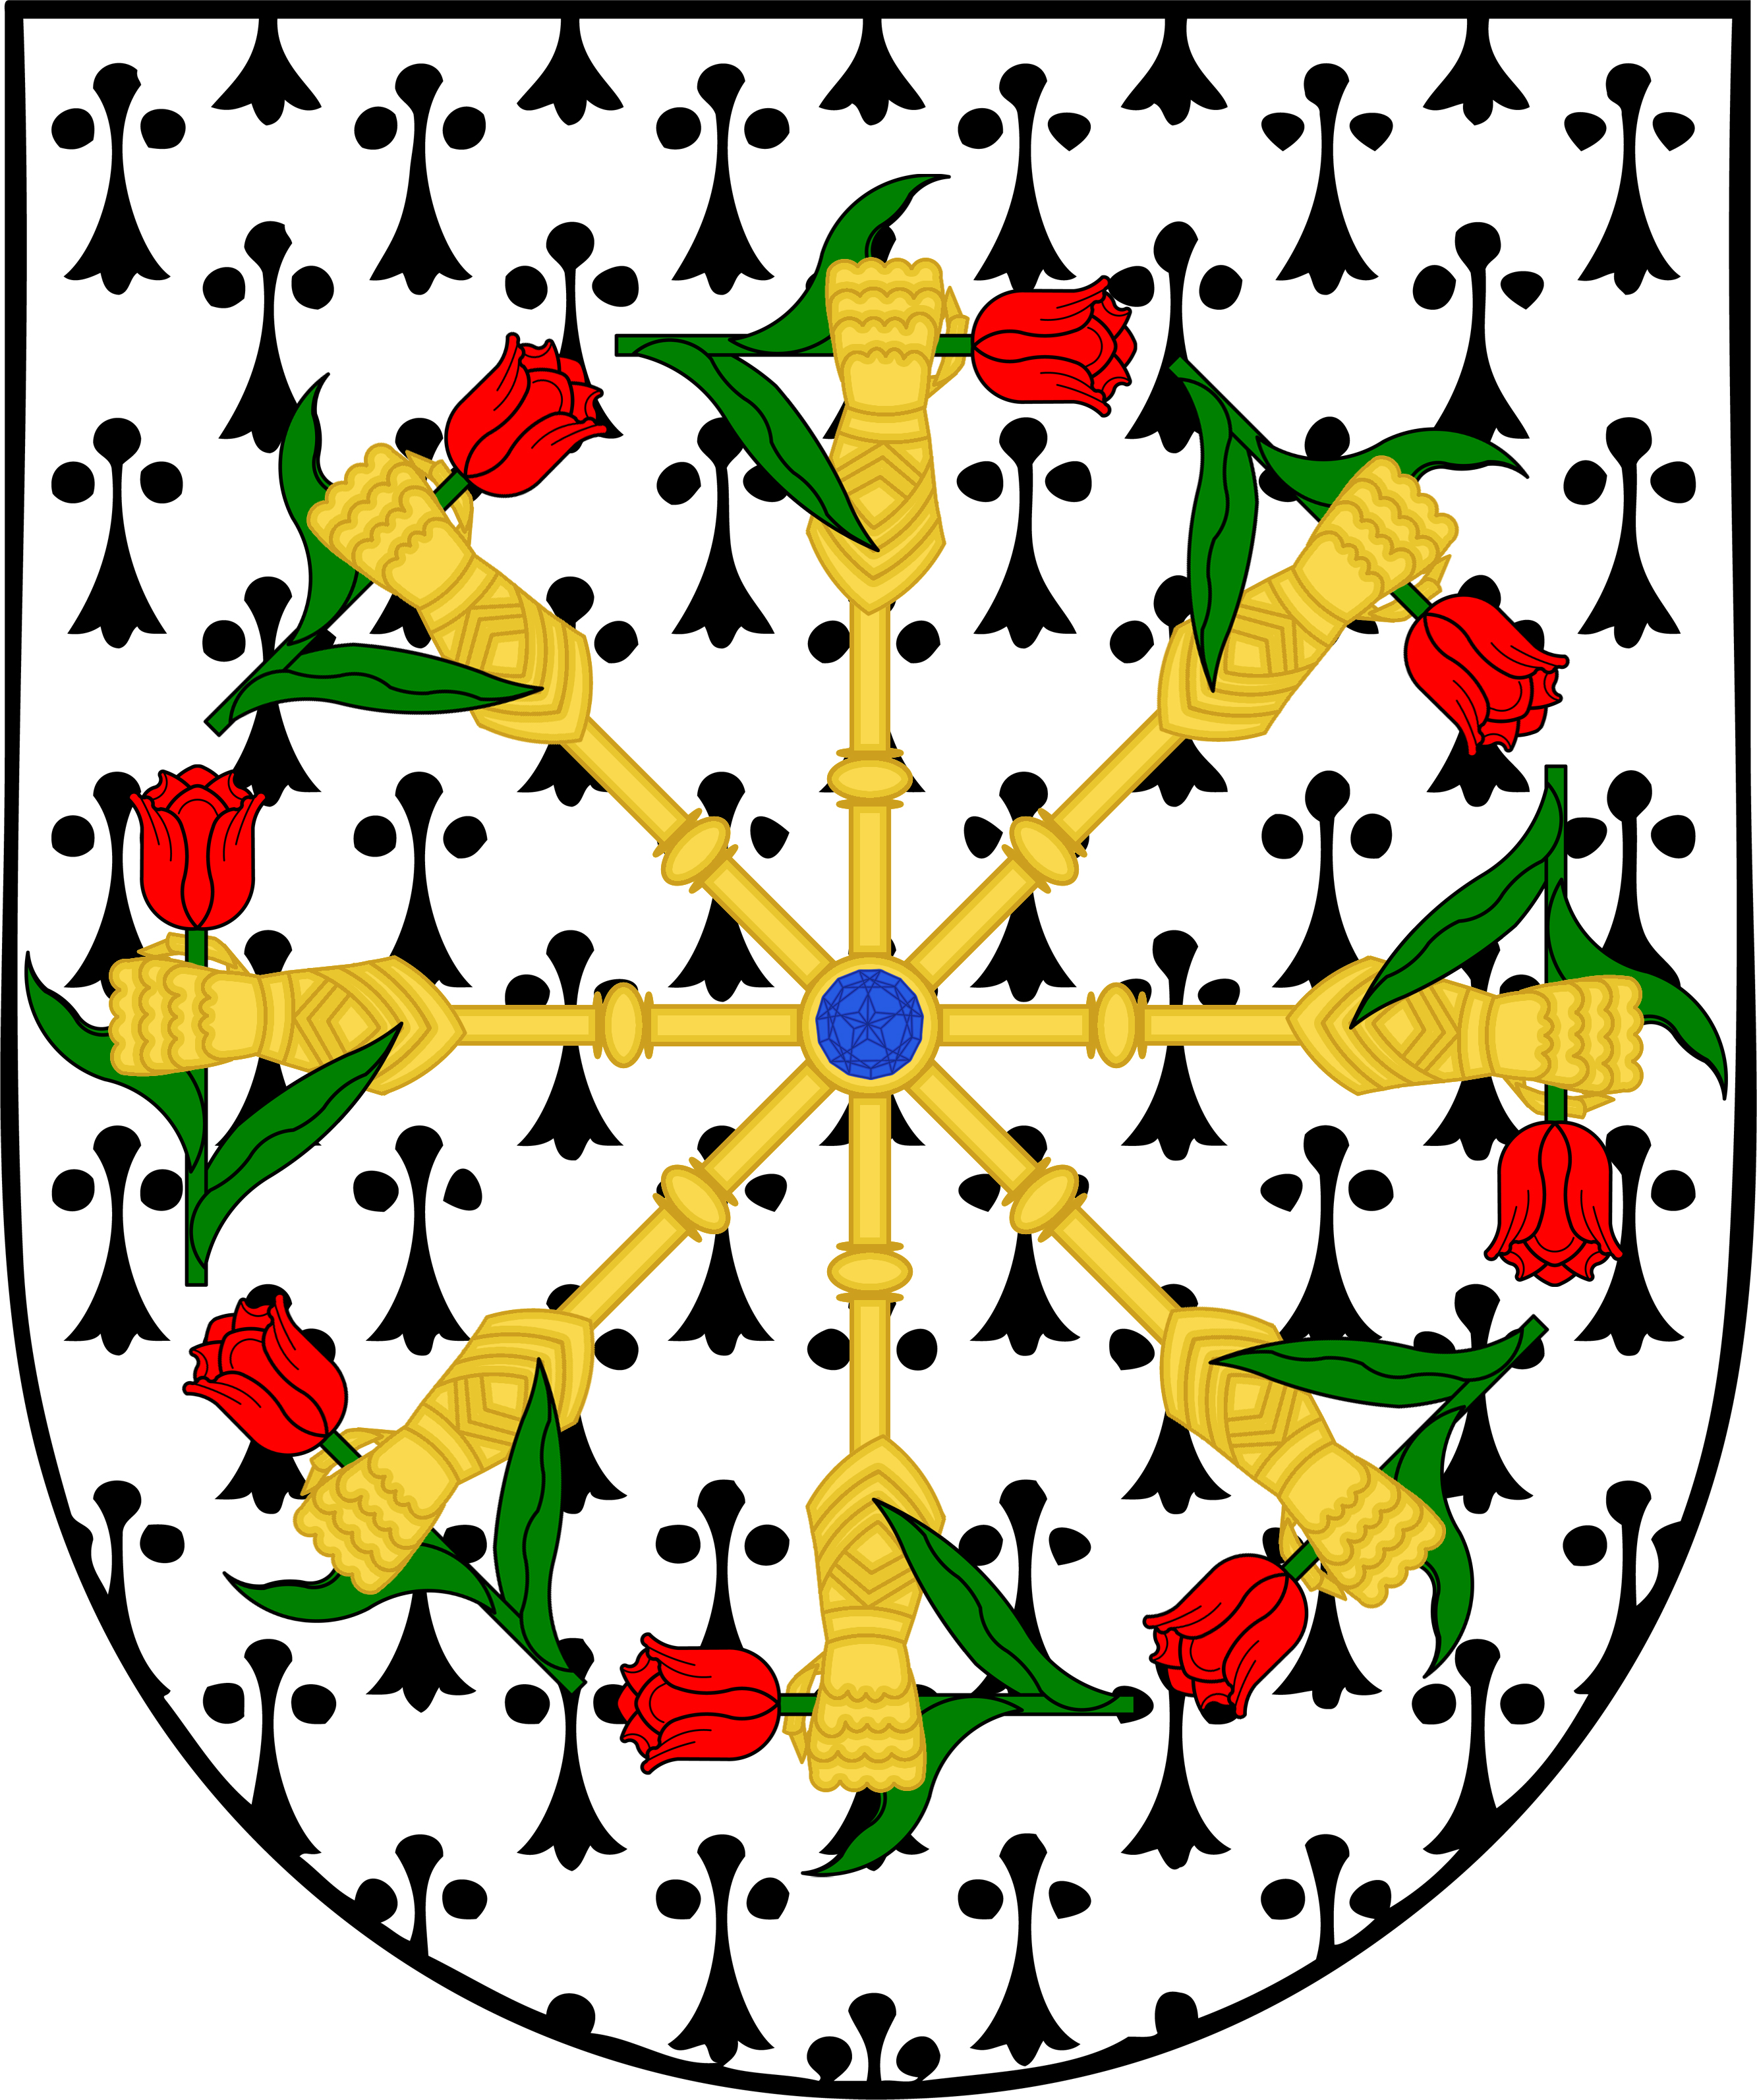 Heraldry as spring comes… A cray-cray explosion of ermine and tulips